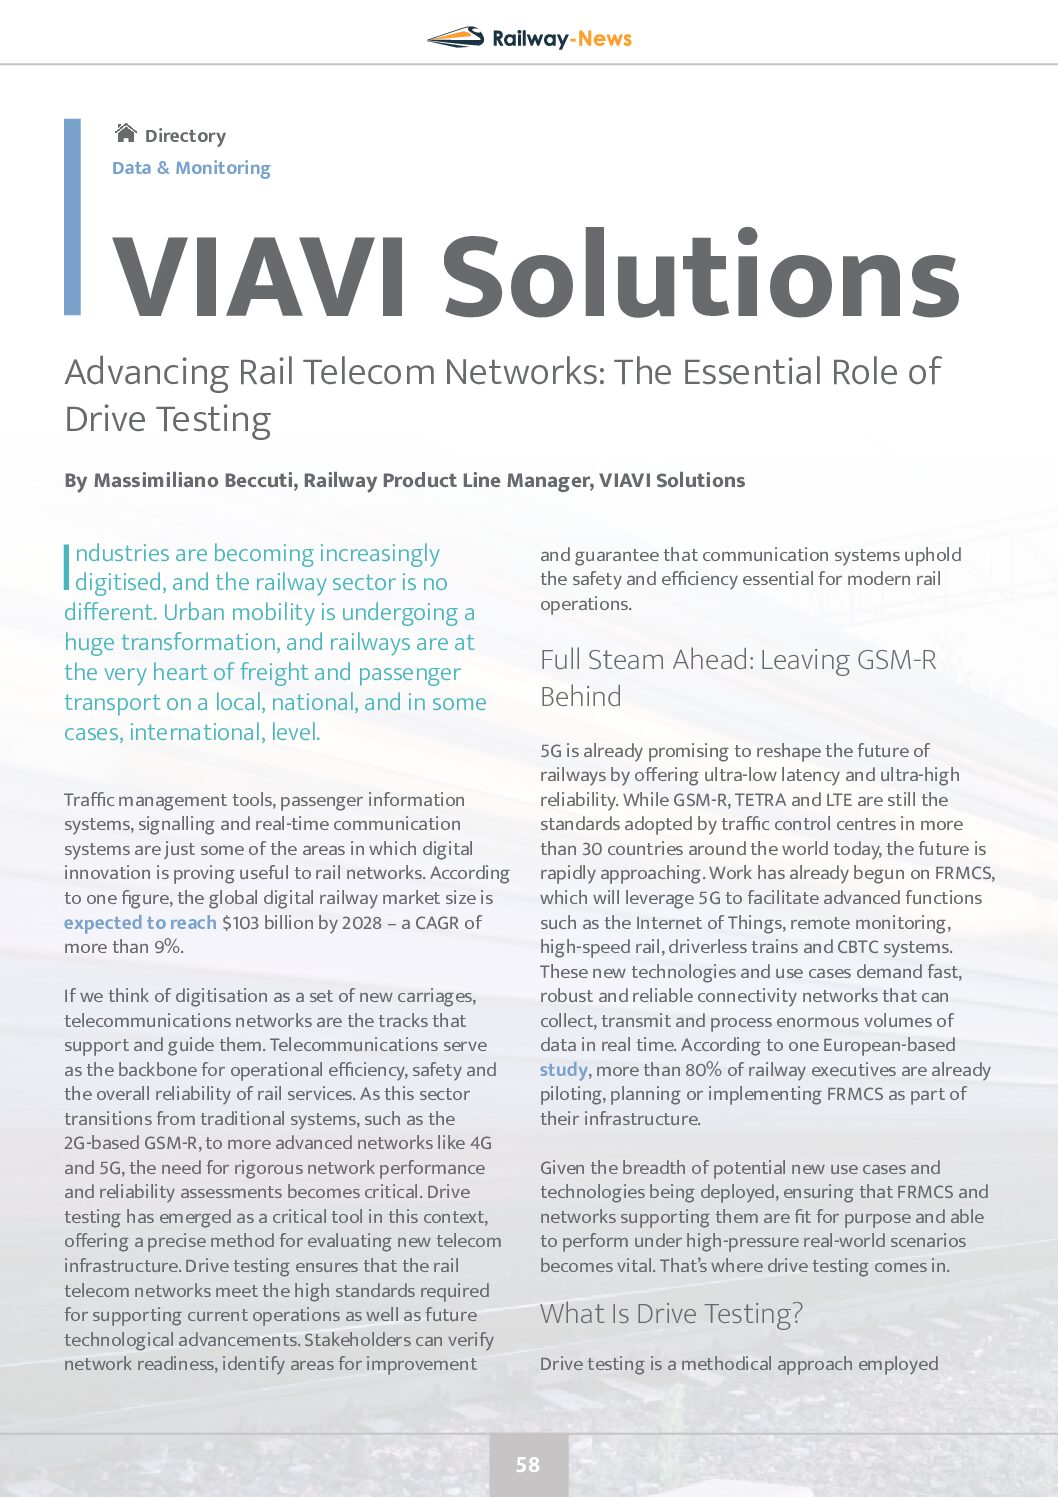 Advancing Rail Telecom Networks: The Essential Role of Drive Testing